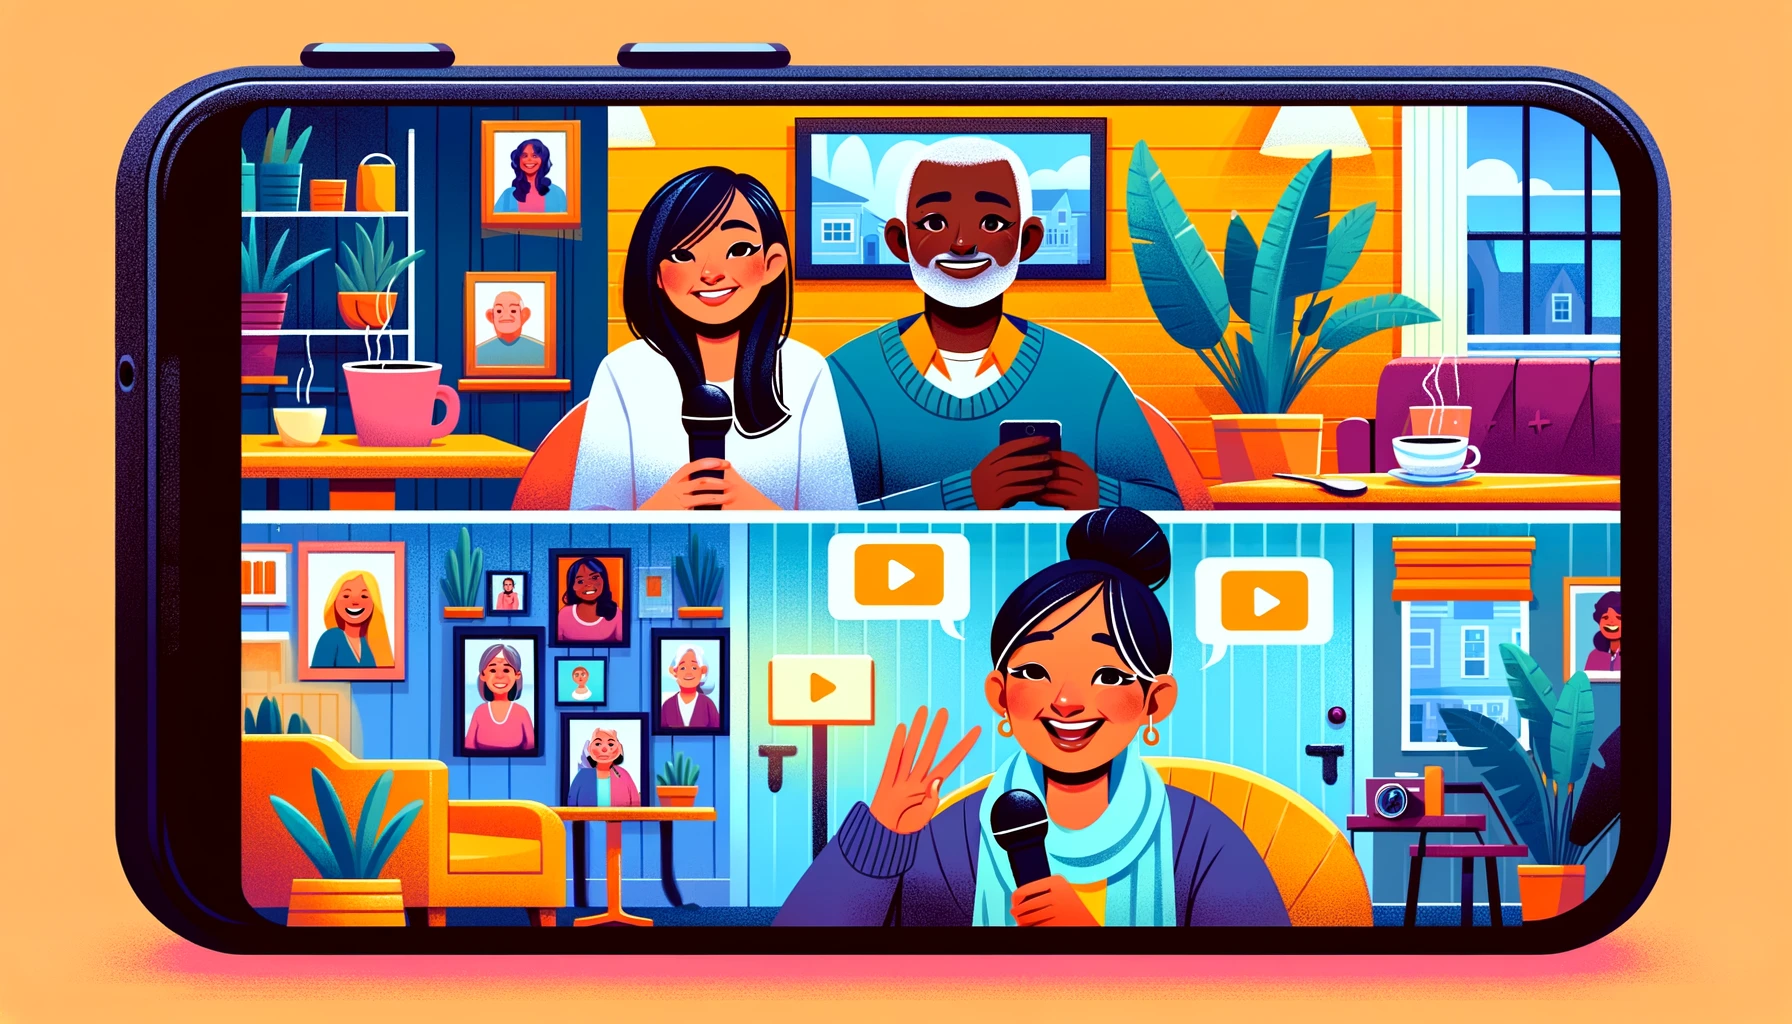 Wide, vibrant illustrative image featuring cartoon characters from diverse backgrounds providing video testimonials. Depicted are a young Asian woman in a cafe, a middle-aged Black man in an office, and an elderly Hispanic woman at home, each enthusiastically sharing their positive experiences. Perfect for demonstrating the impact of customer testimonials in a non-photo realistic style.